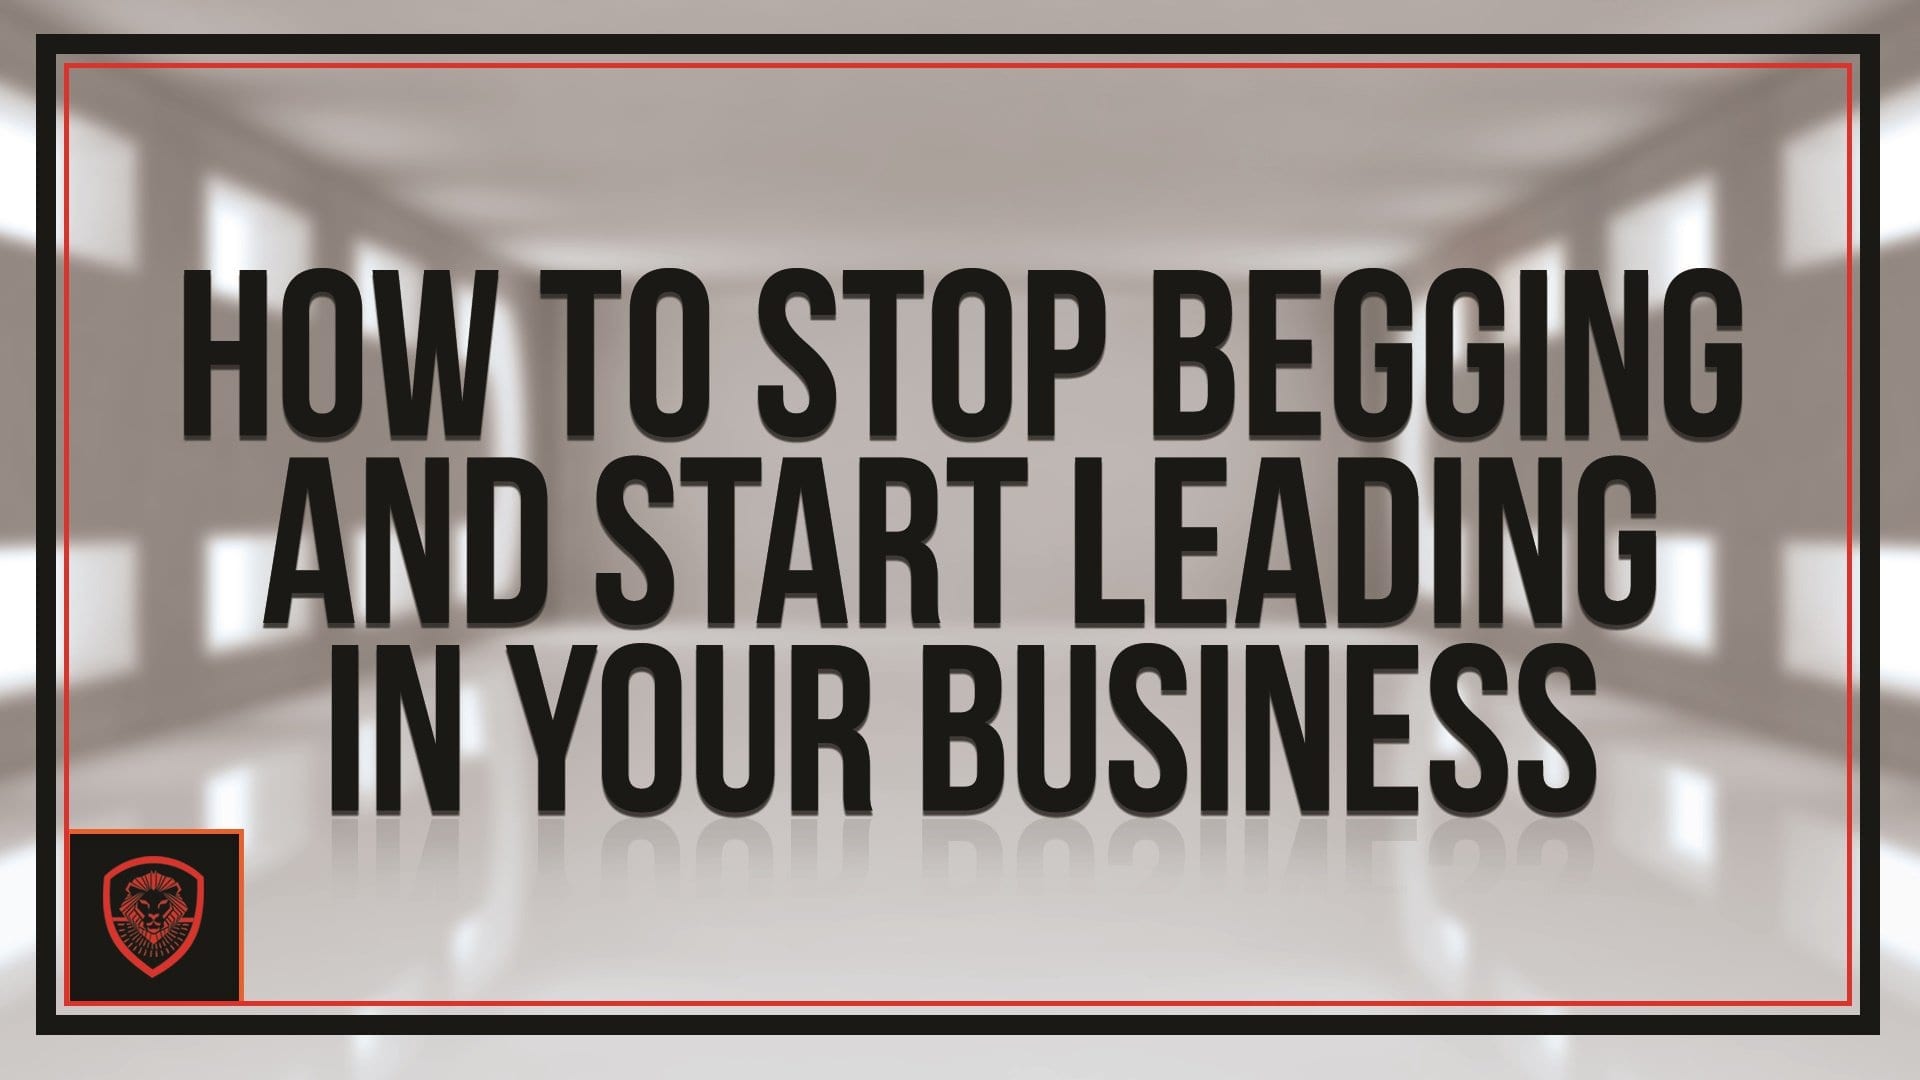 Do you beg people to do business with you? Do you hover over people once you get them? Here's how to stop begging and start leading in your business.